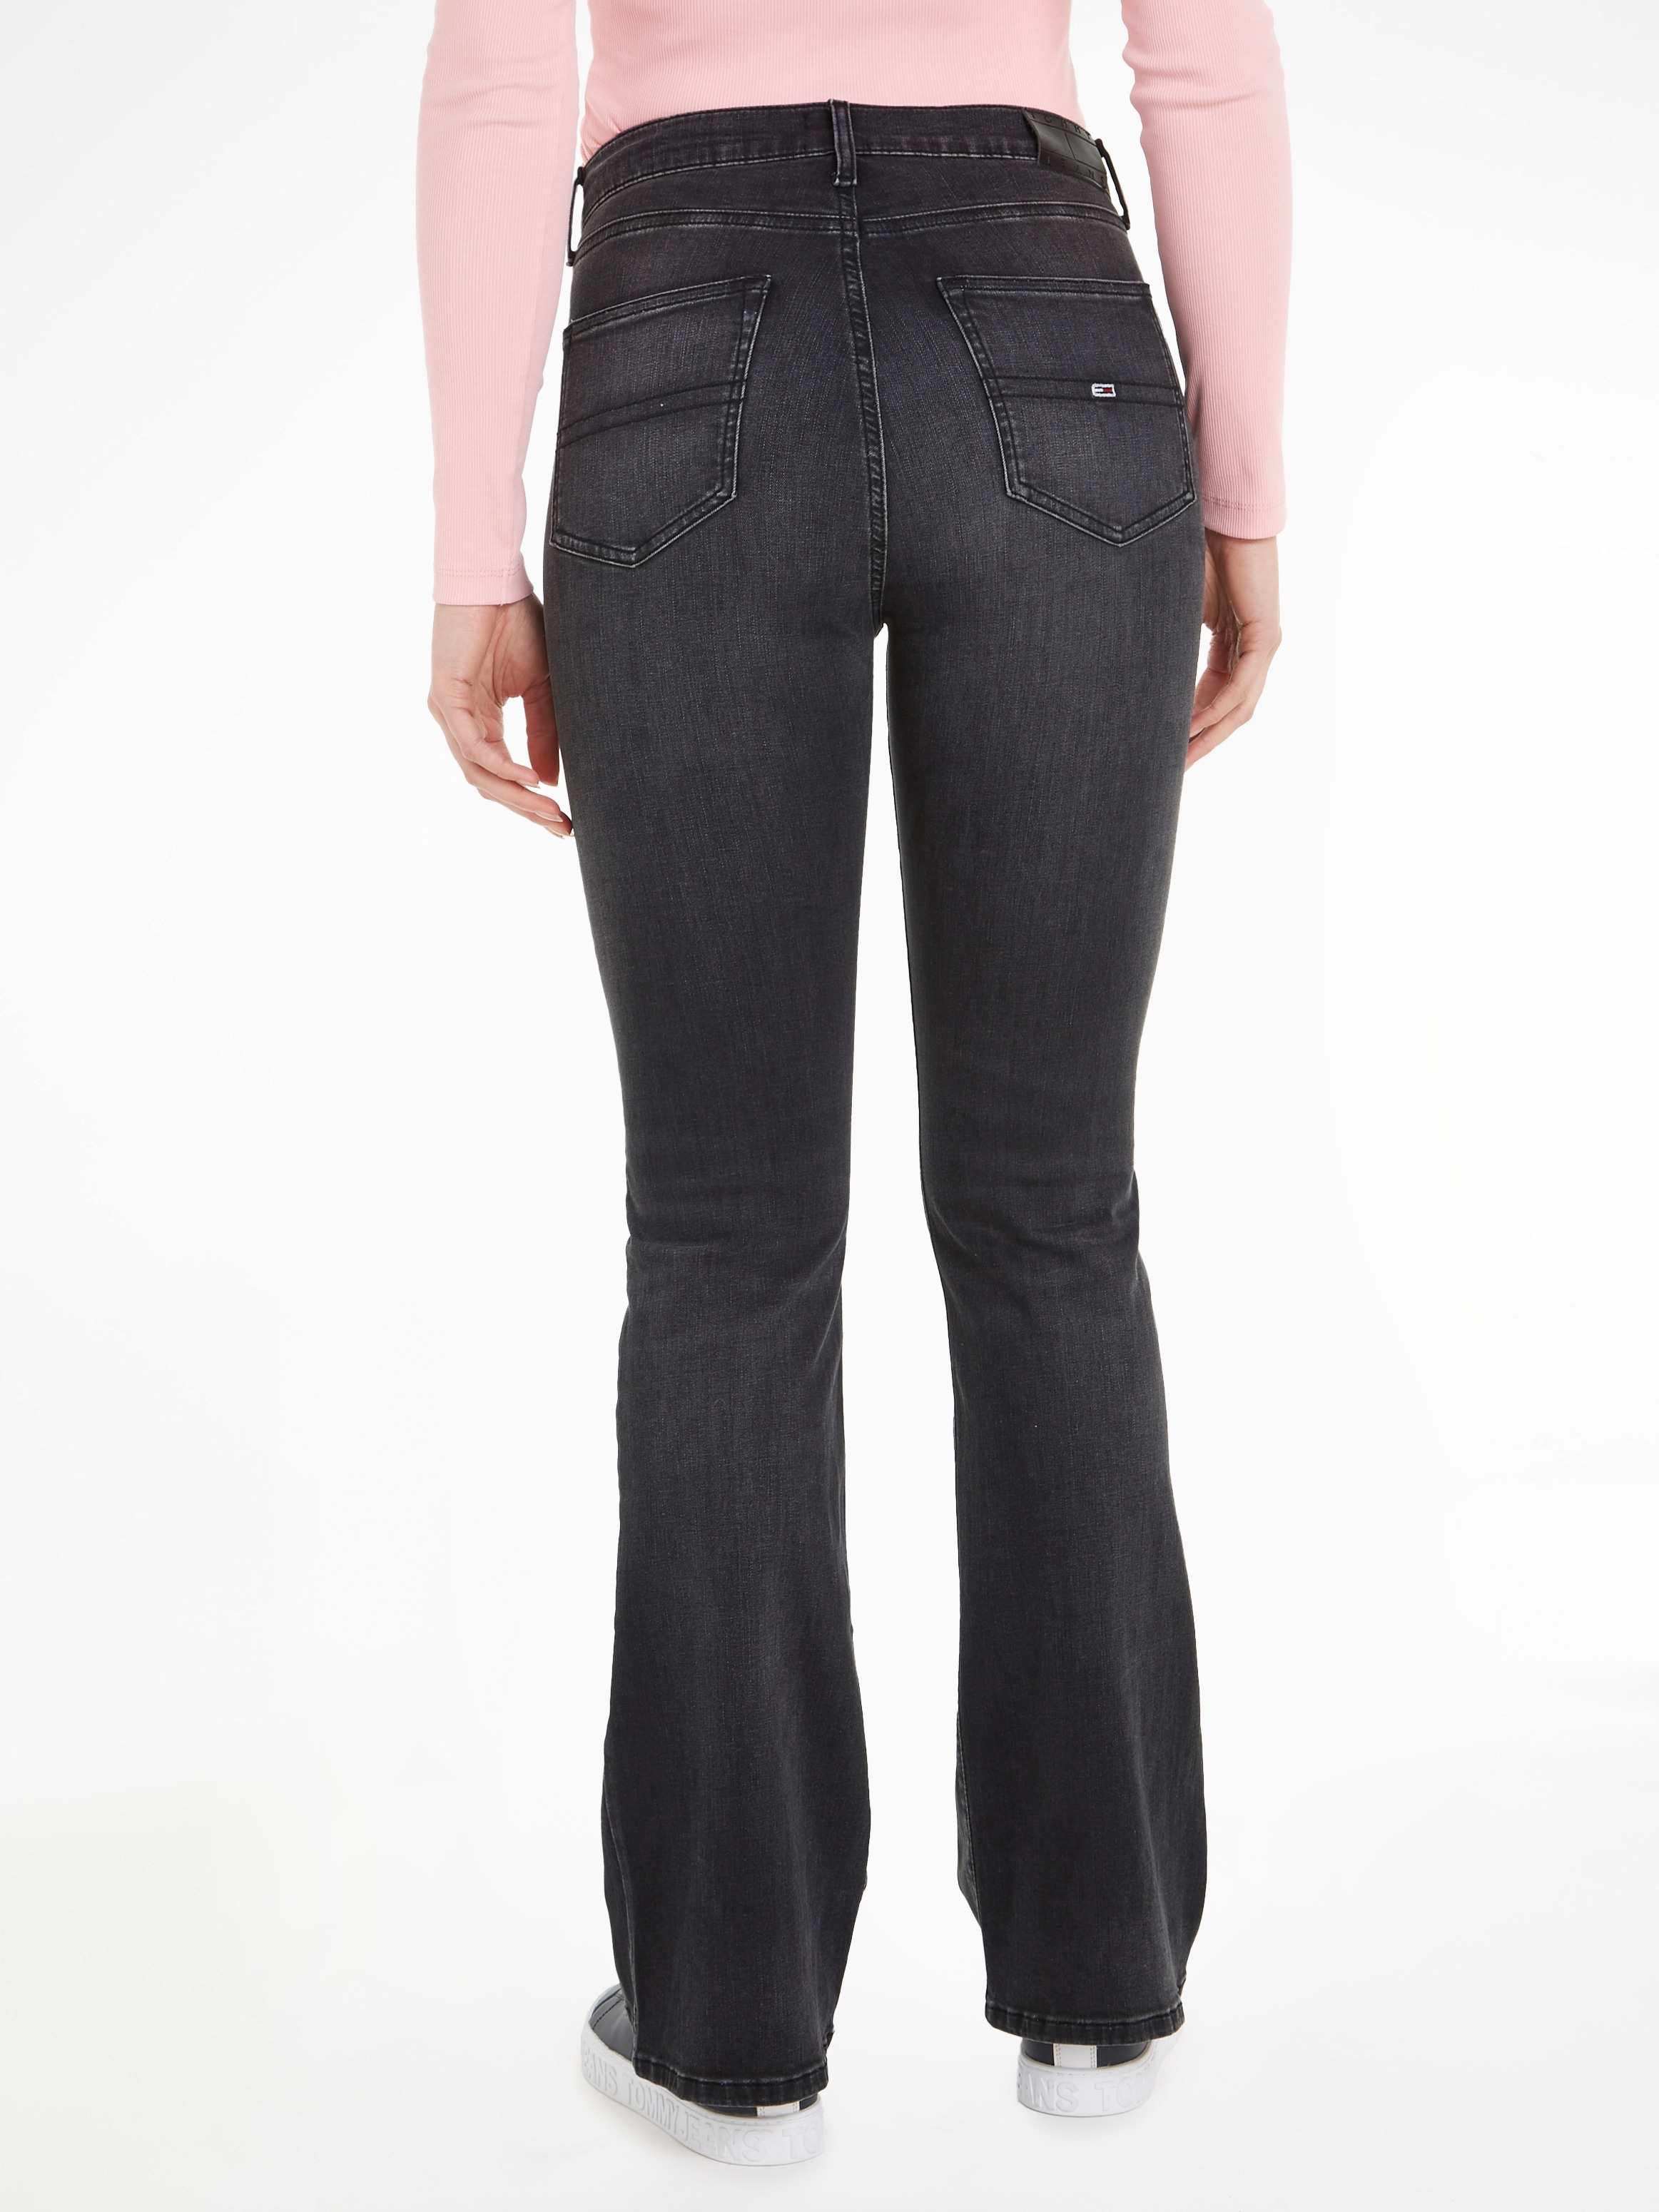 mit »Sylvia«, Markenlabel bei Jeans ♕ Bequeme Jeans Tommy